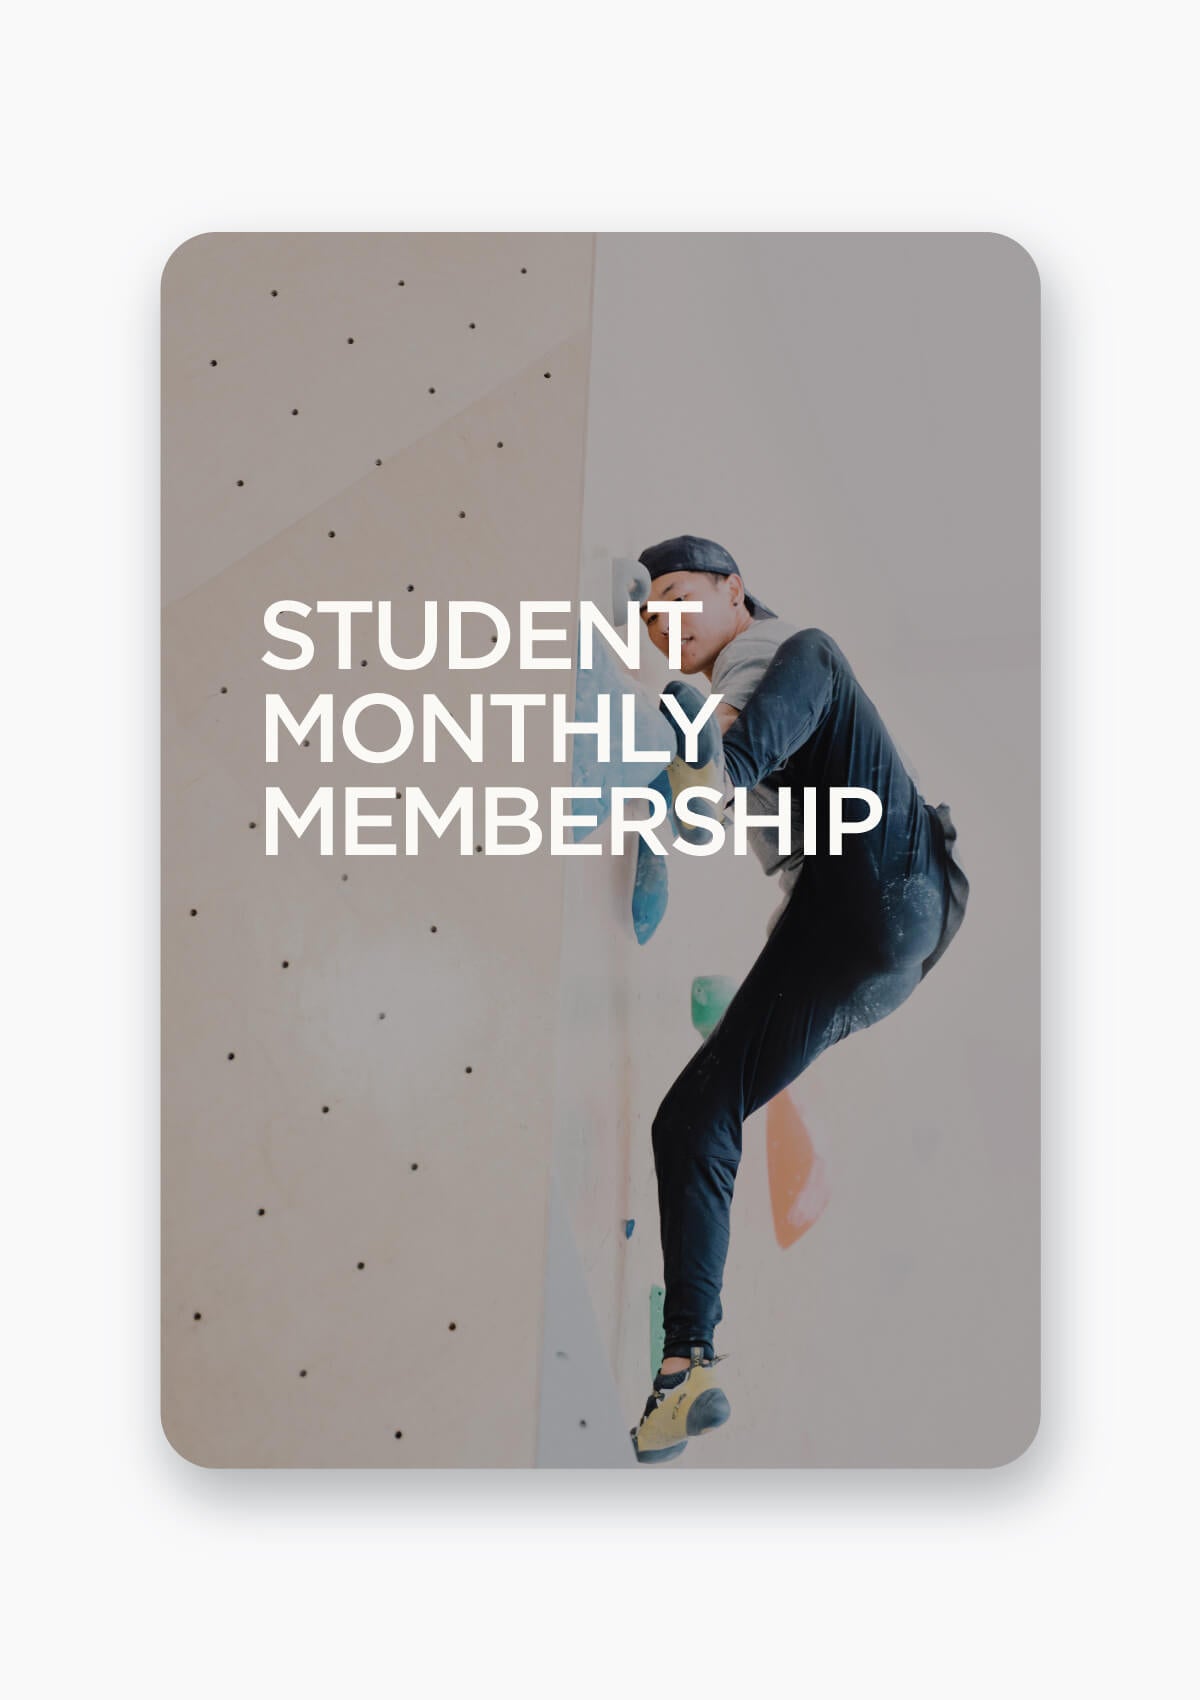 STUDENT MONTHLY MEMBERSHIP